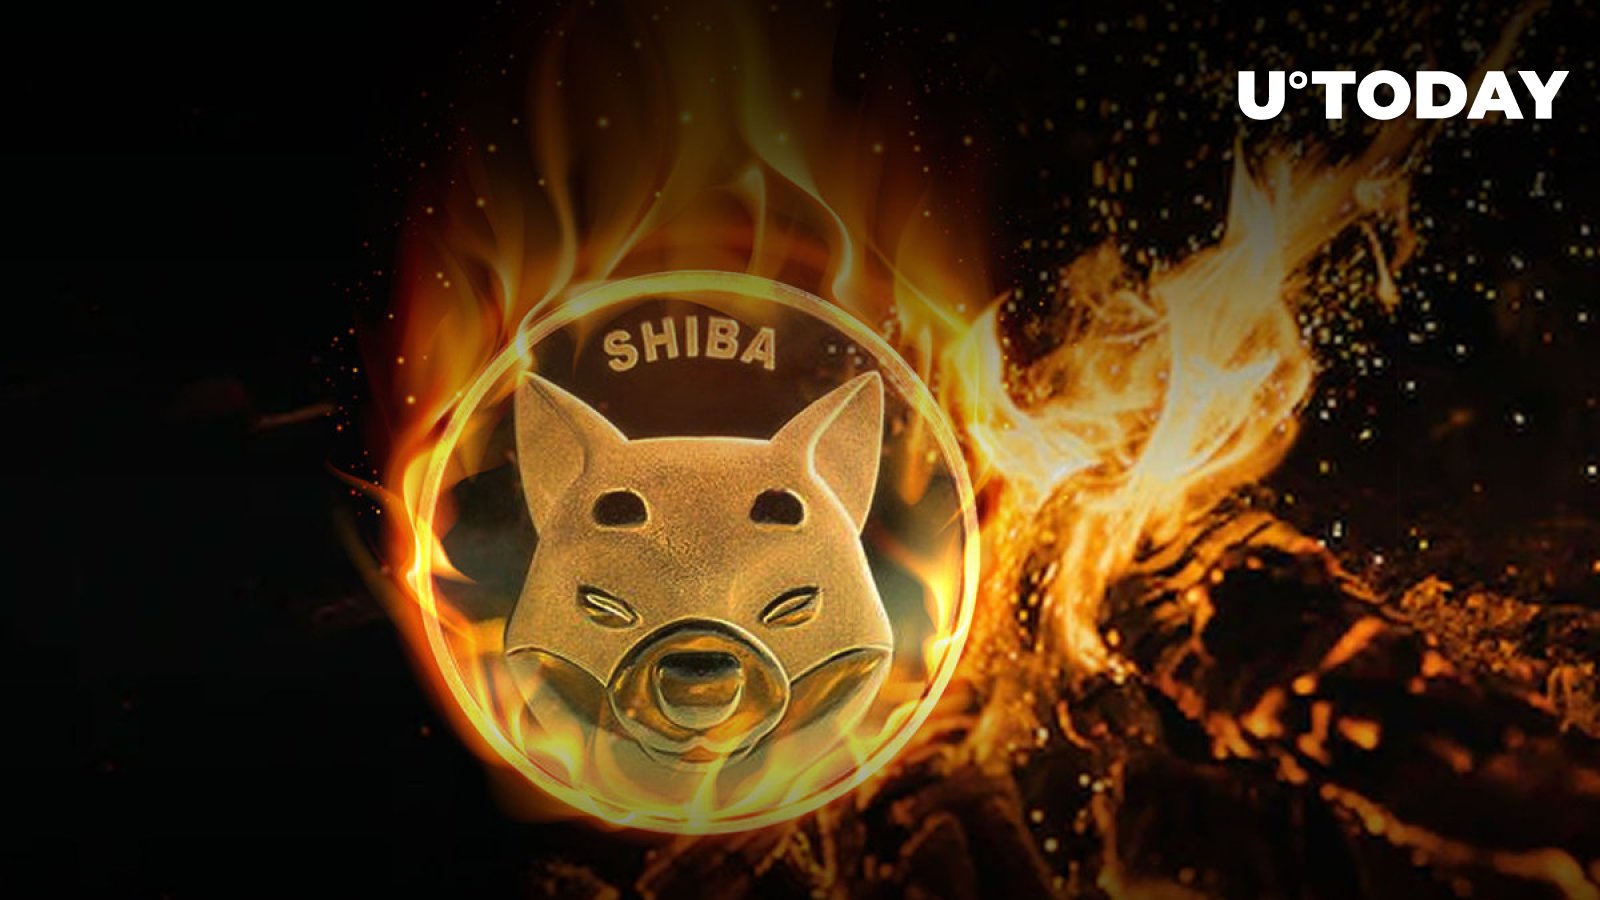 SHIB Burn Rate 1,900% Up As SHIB Army Gets Inspired by Upcoming SHIB Game “Download” Day